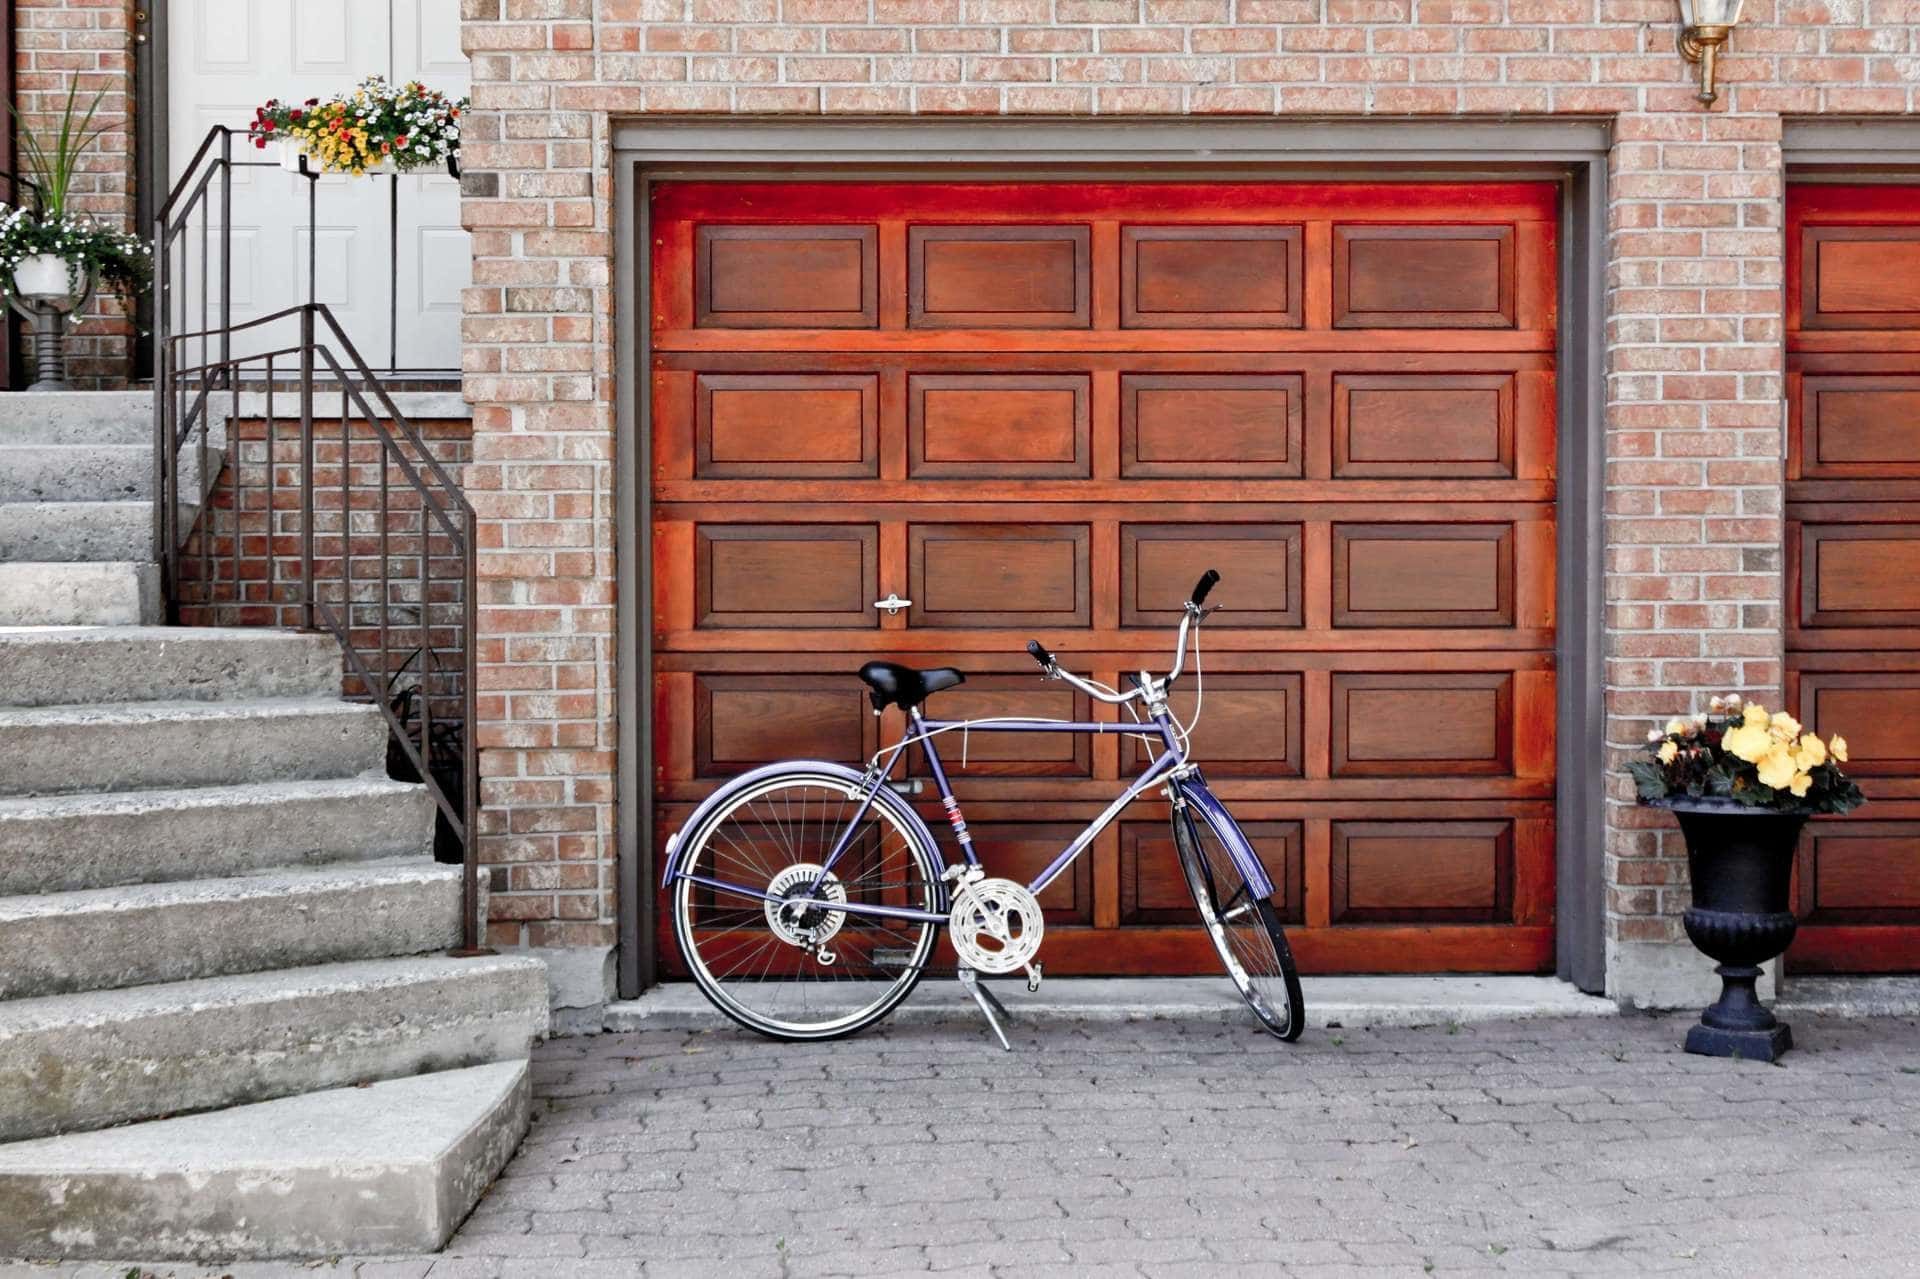 A bicycle is parked in front of a wooden garage door.